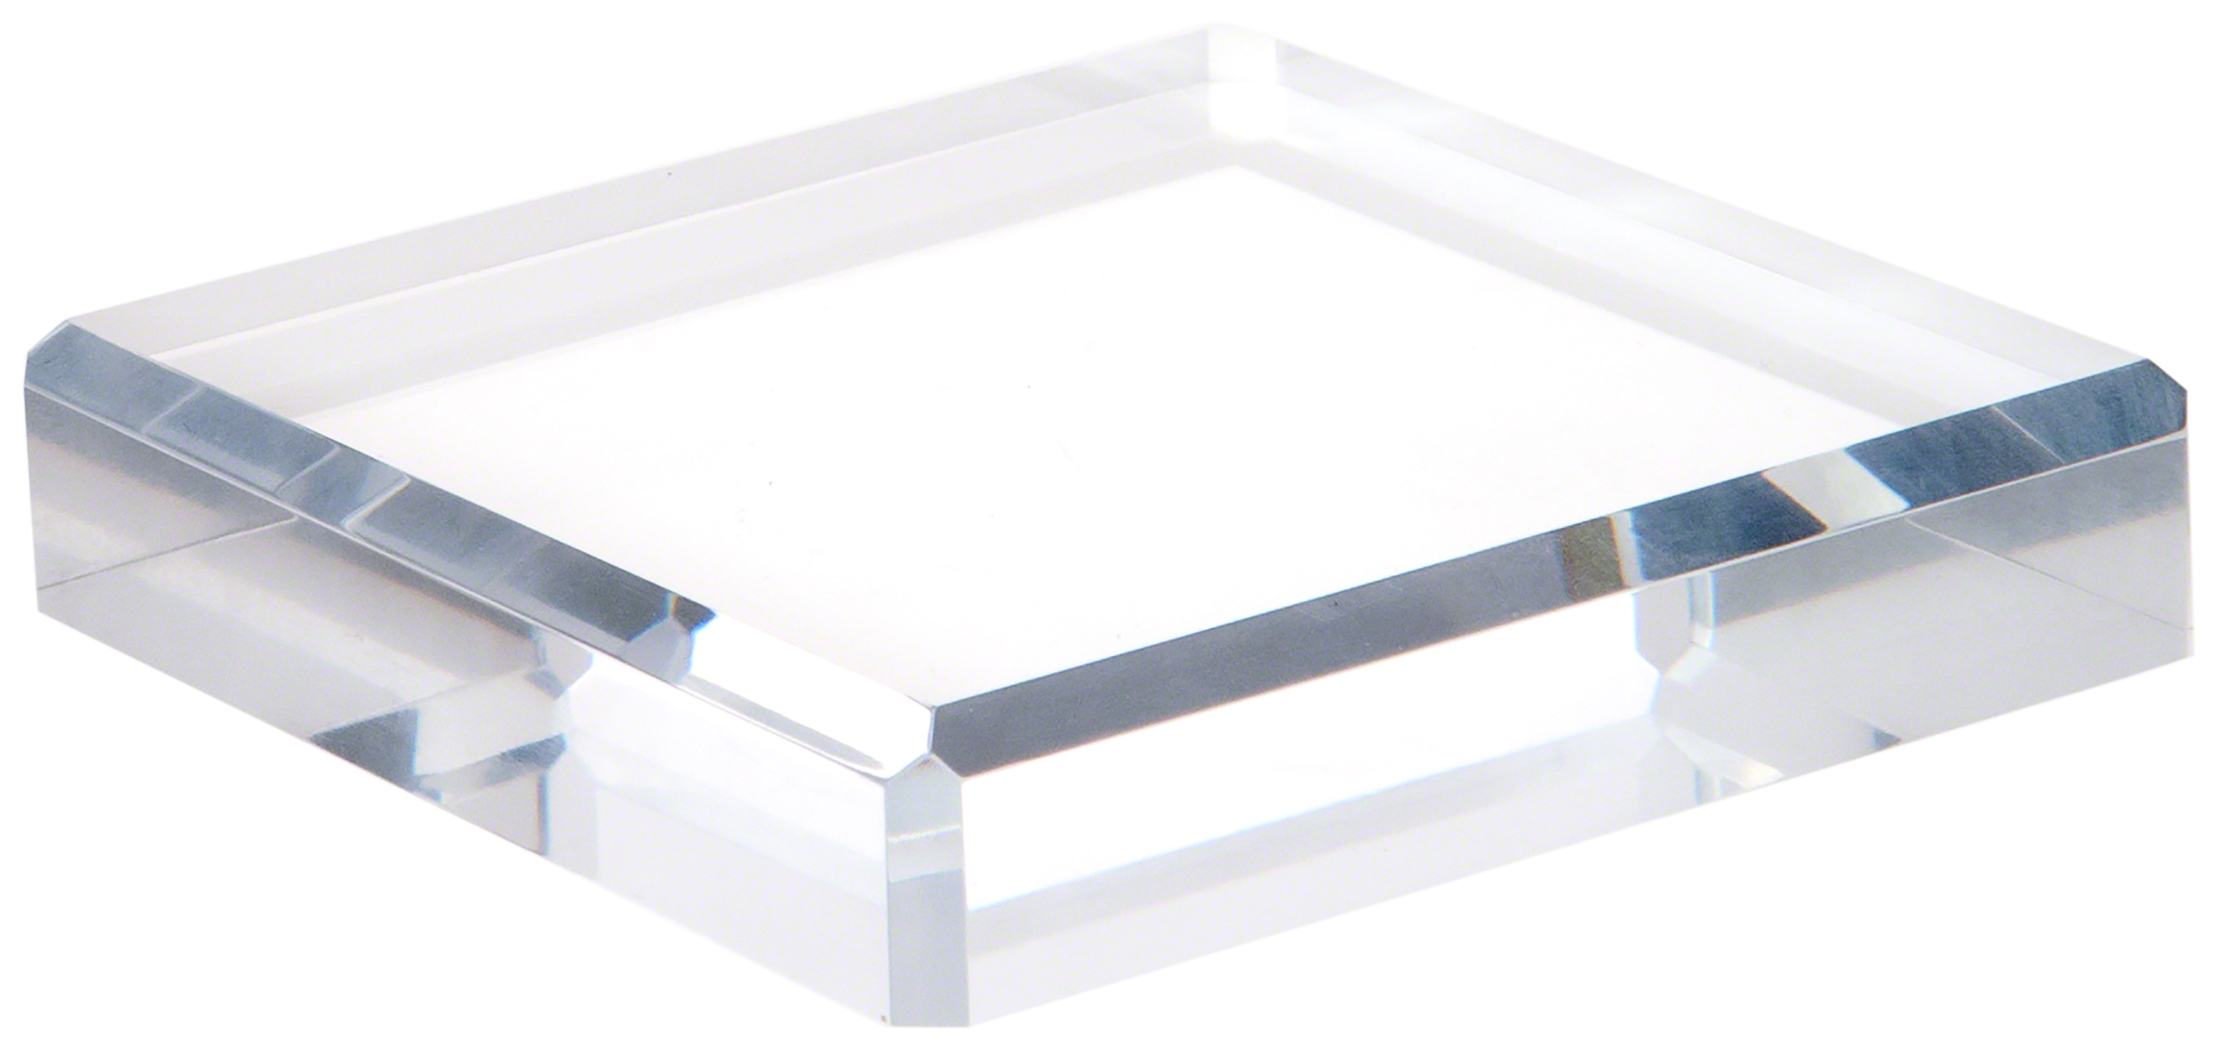 Plymor Clear Polished Acrylic Square Beveled Display Base, 5" W x 5" D x 1" H